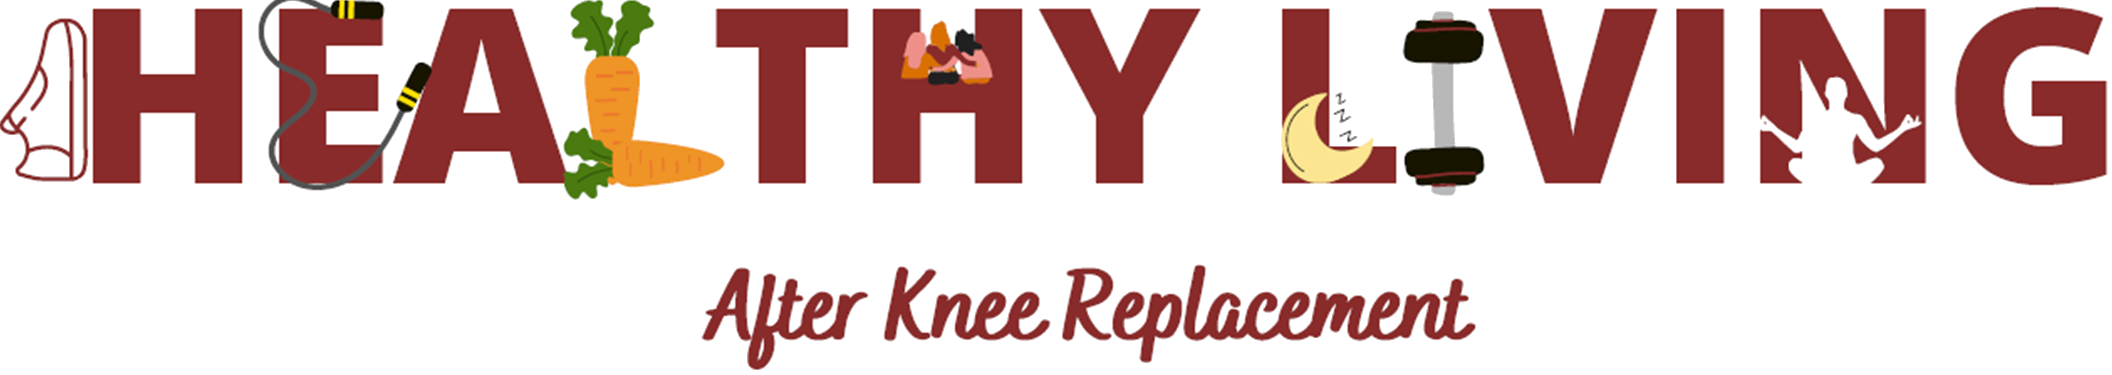 Healthy Living After Total Knee Replacement